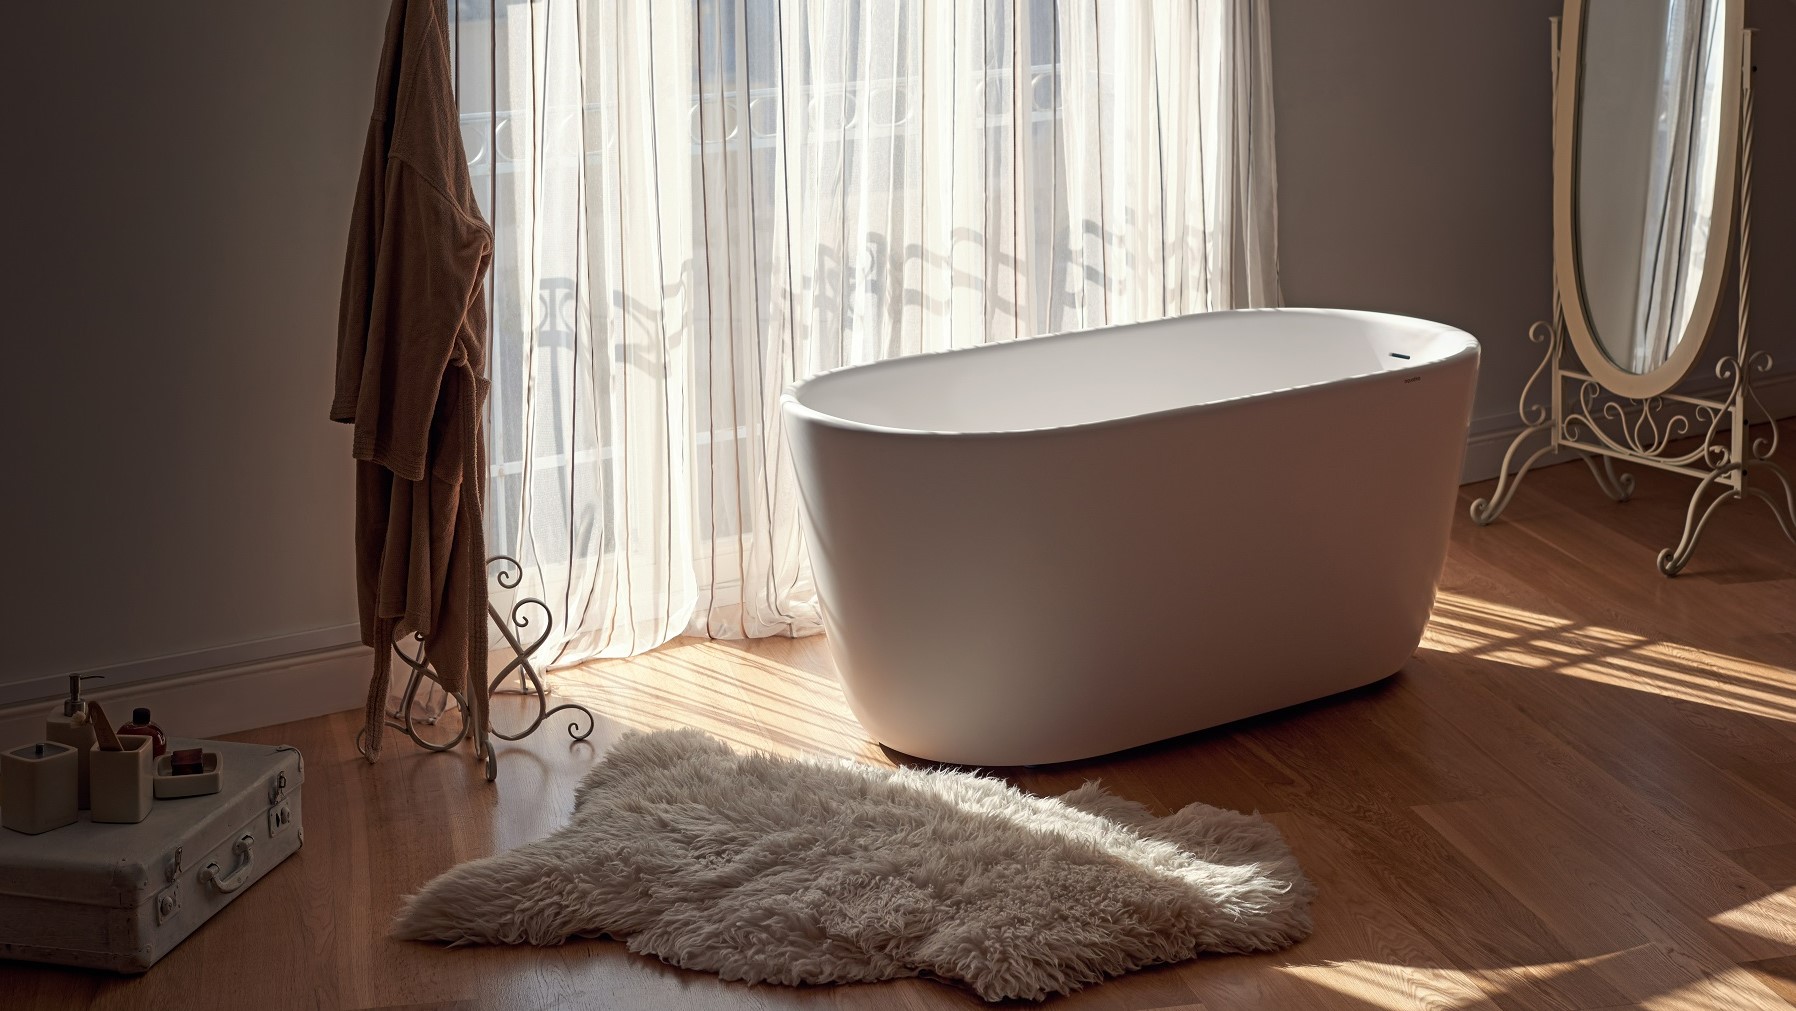 Lullaby Wht Freestanding Solid Surface Bathtub web(5) 16 9